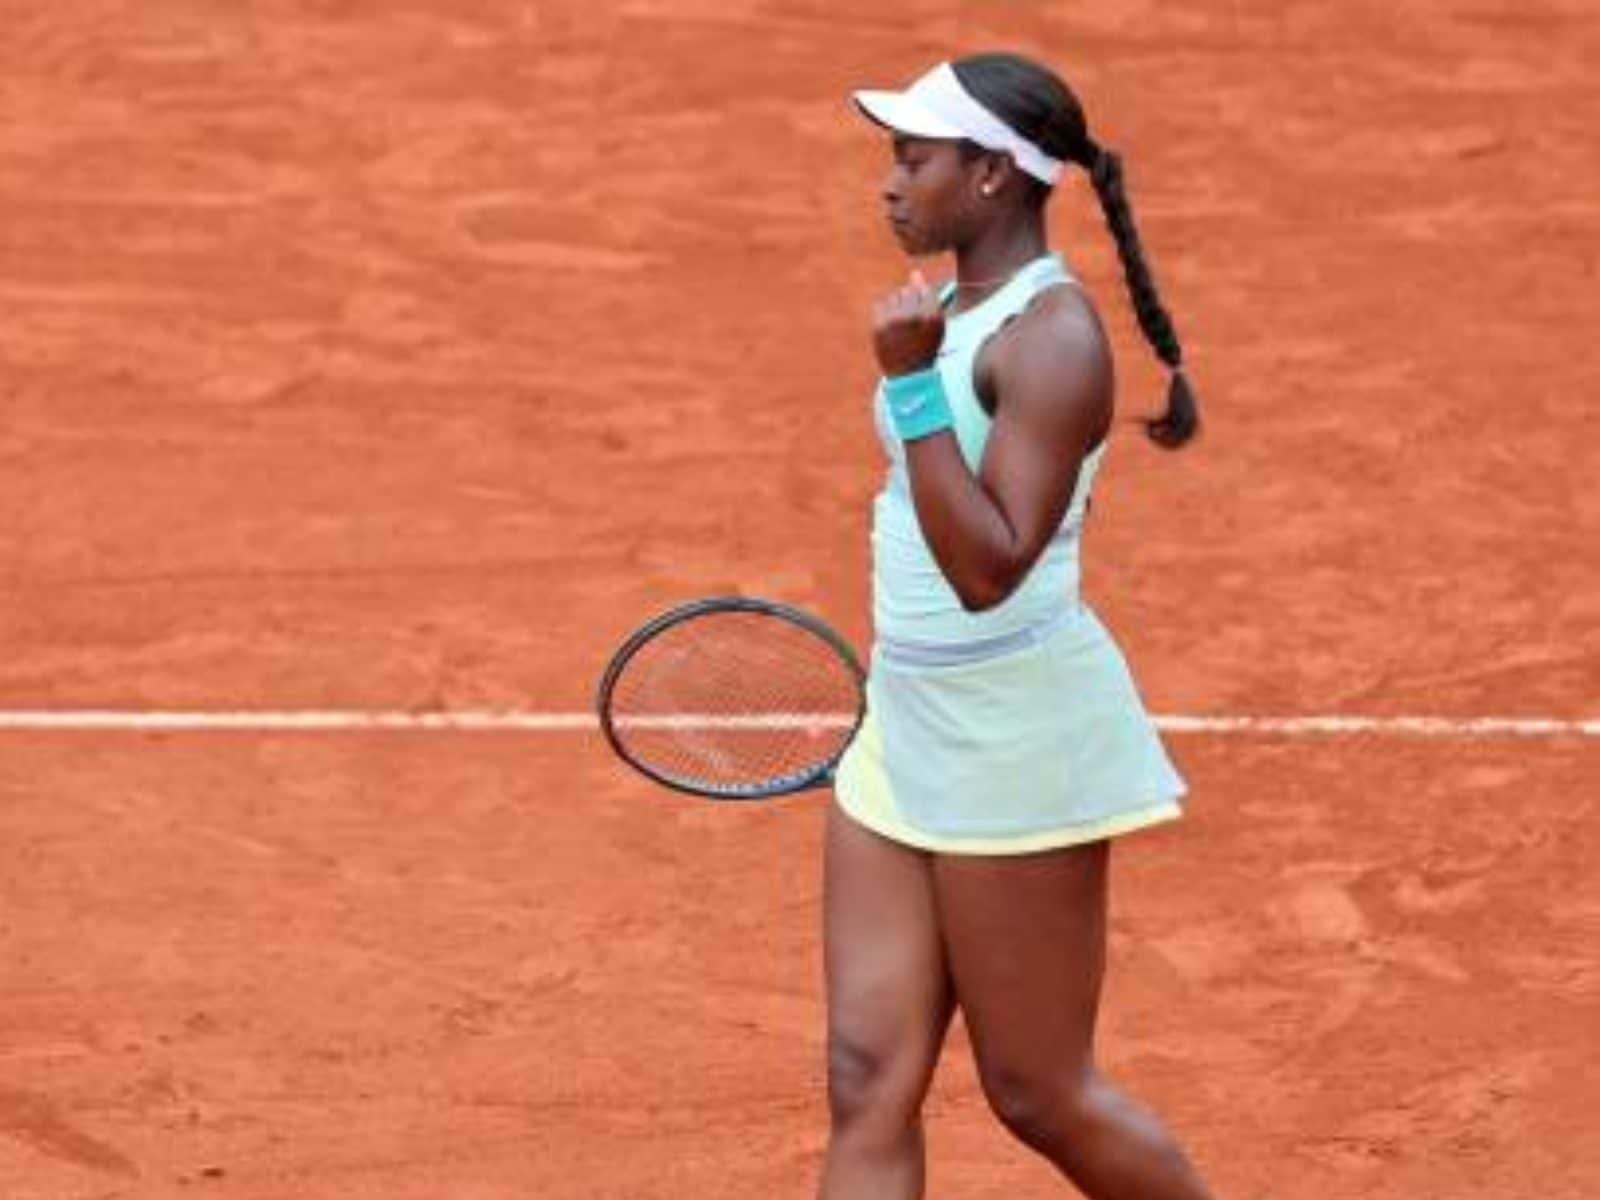 I Got Stung by a Bee Sloane Stephens Narrates Painful Experience During Parma Open